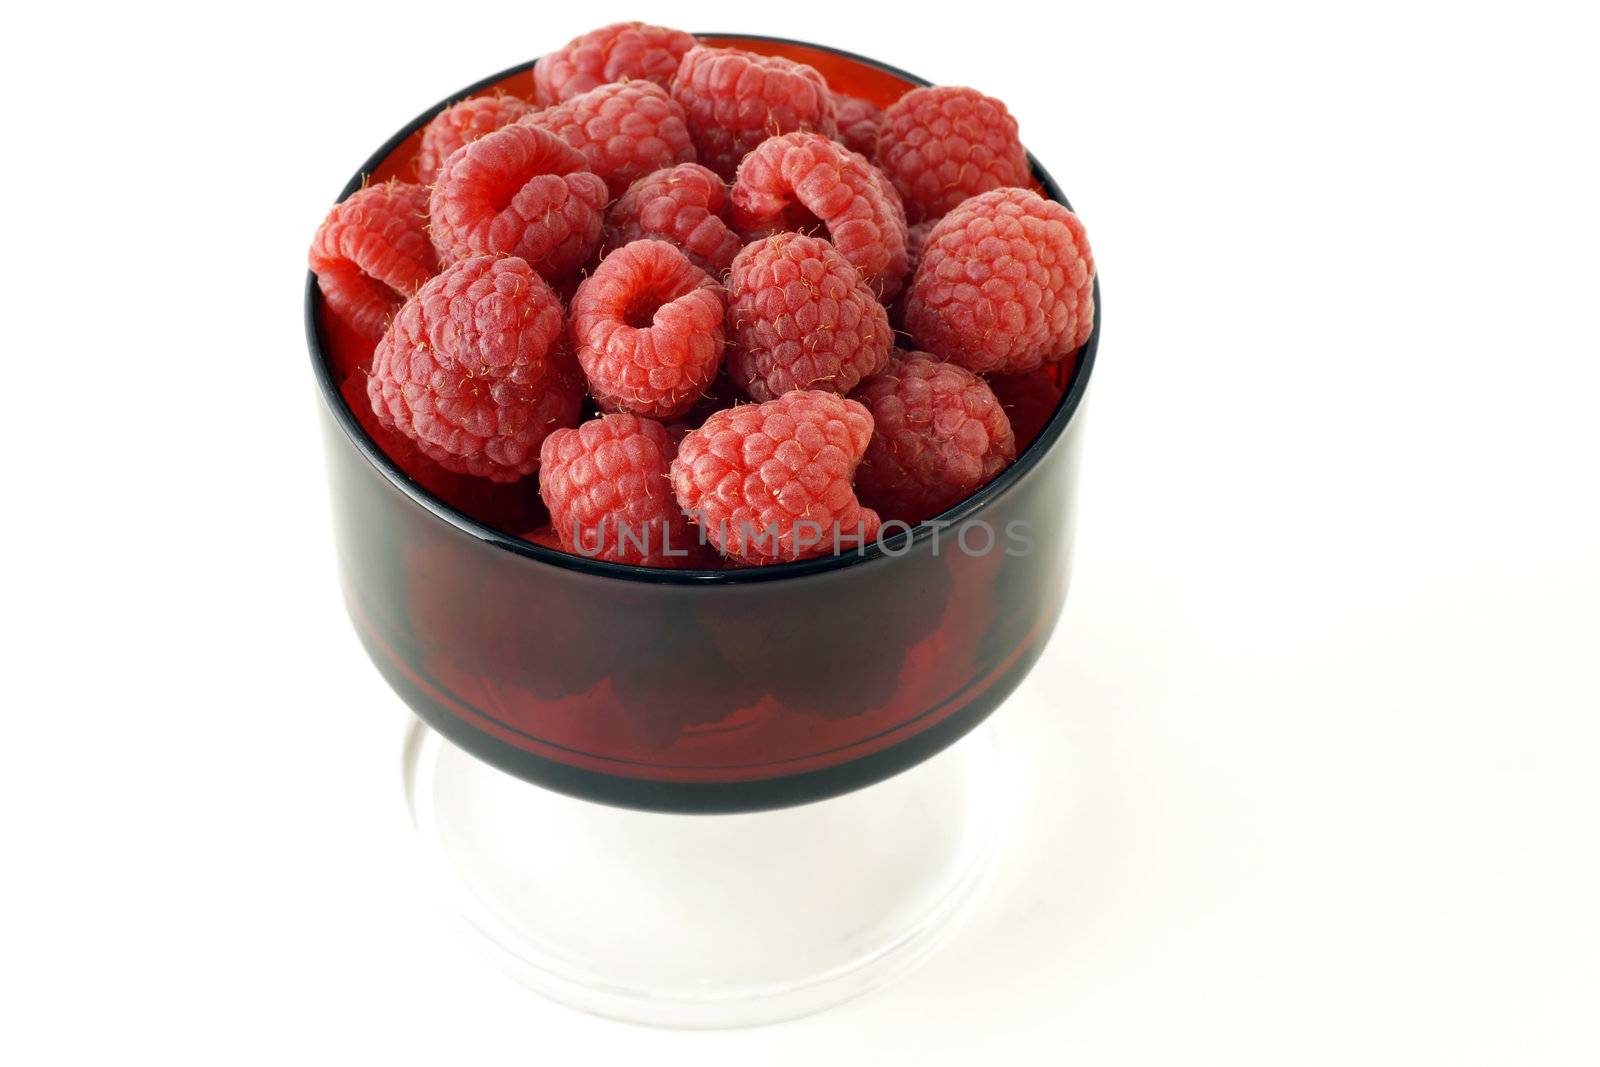 Vintage red glass filled with plumb raspberries, healthy and delicious fruits.